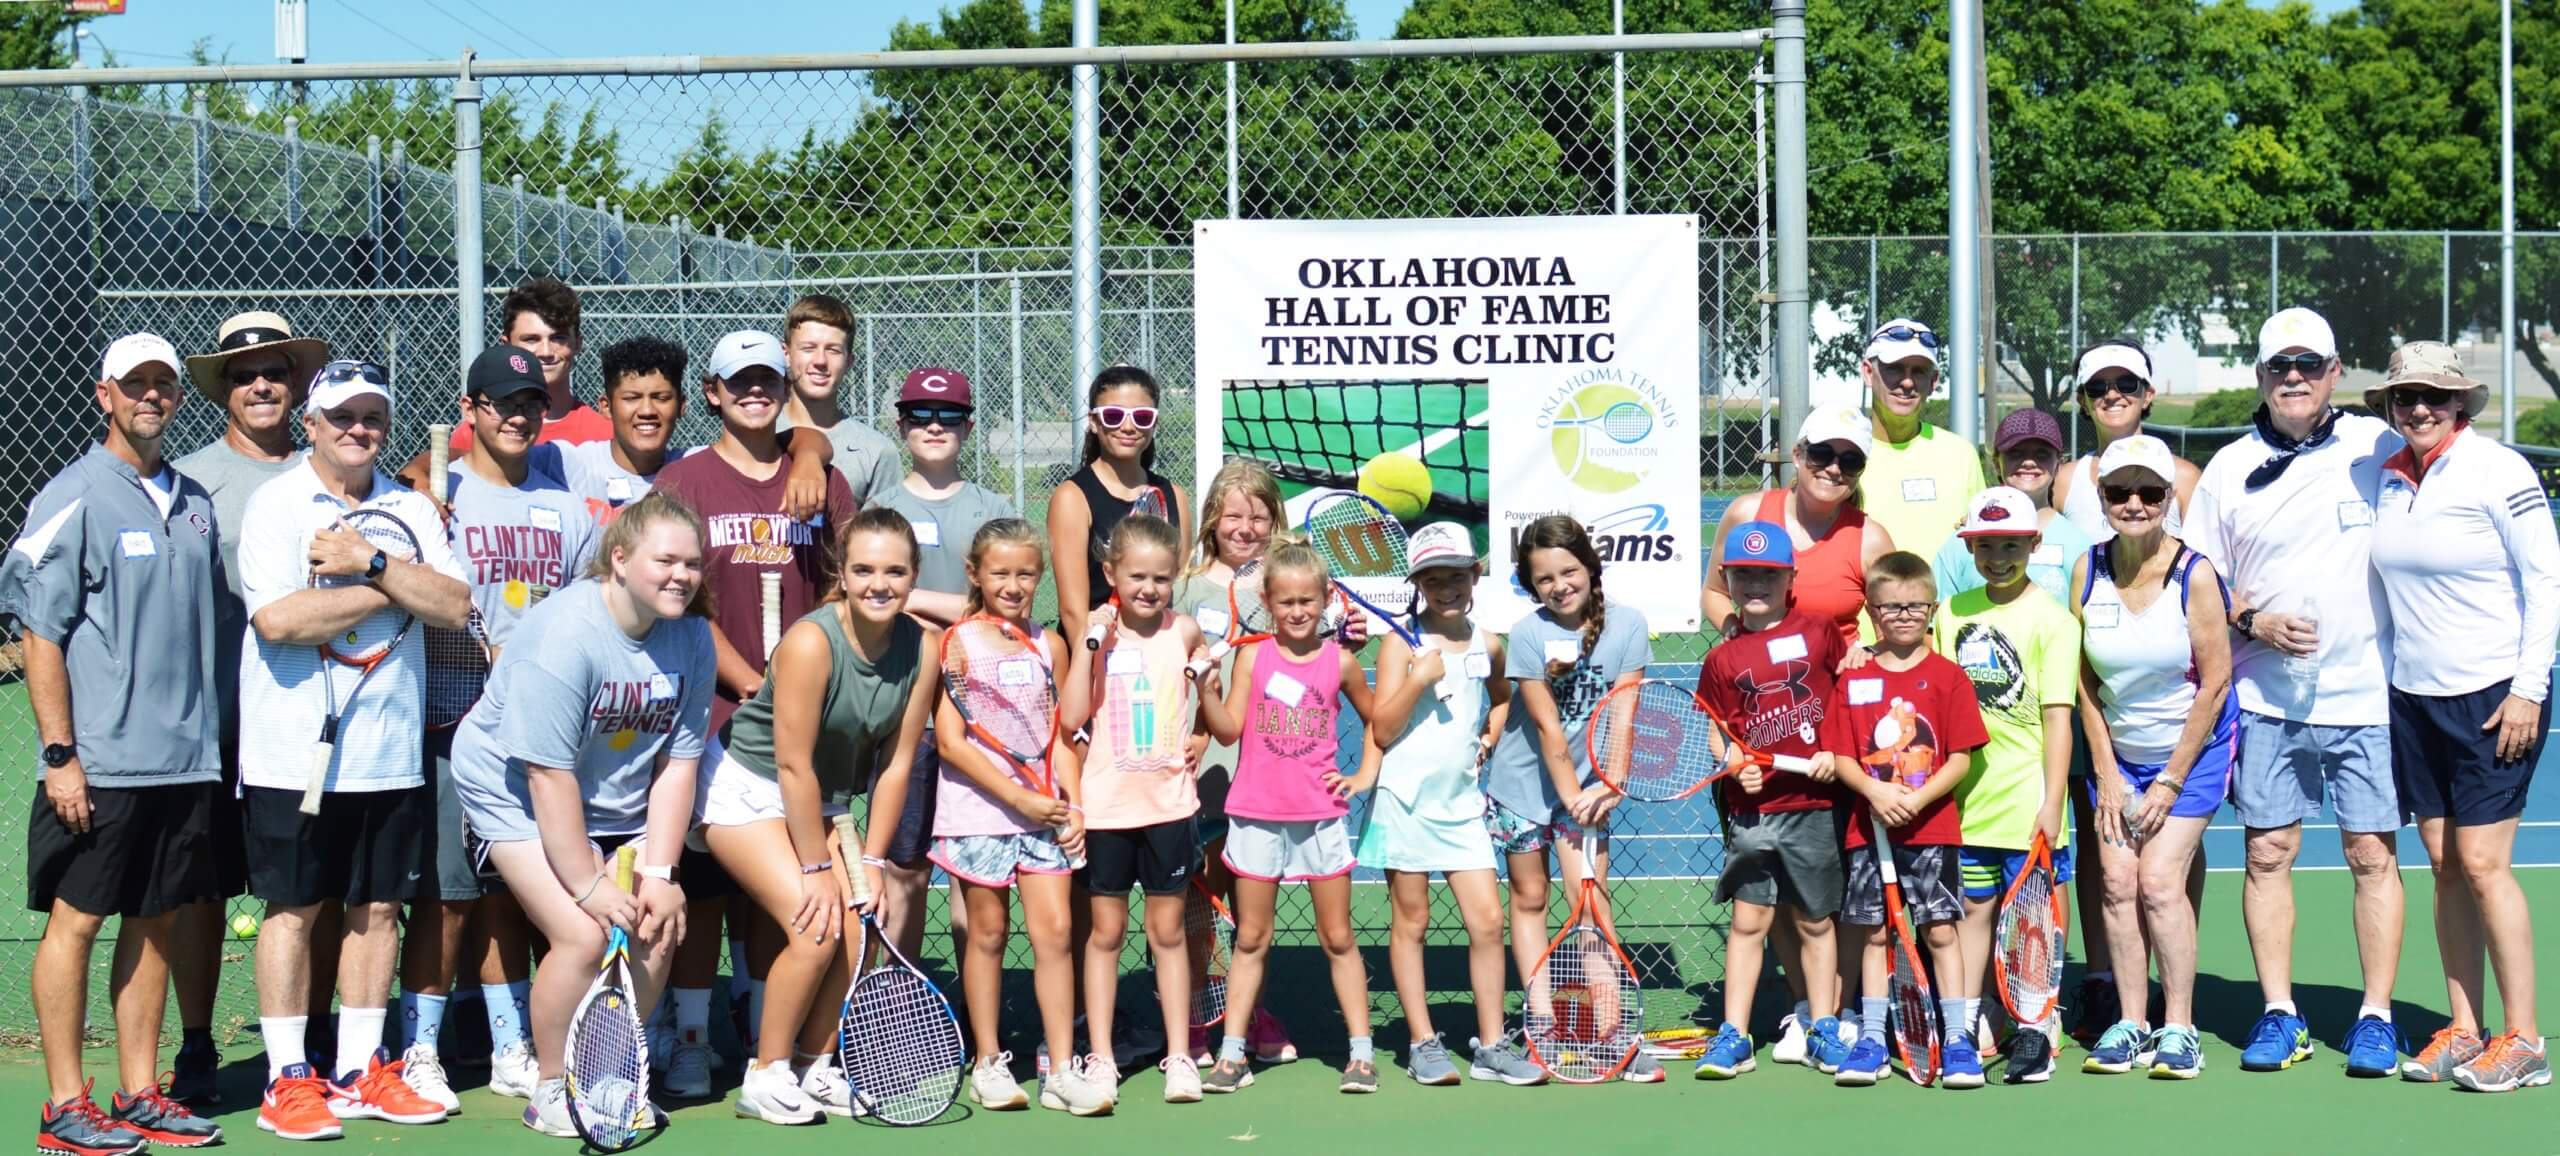 2019 Oklahoma Tennis Hall of Fame Clinic in Clinton, OK 
Custer and Washita Counties